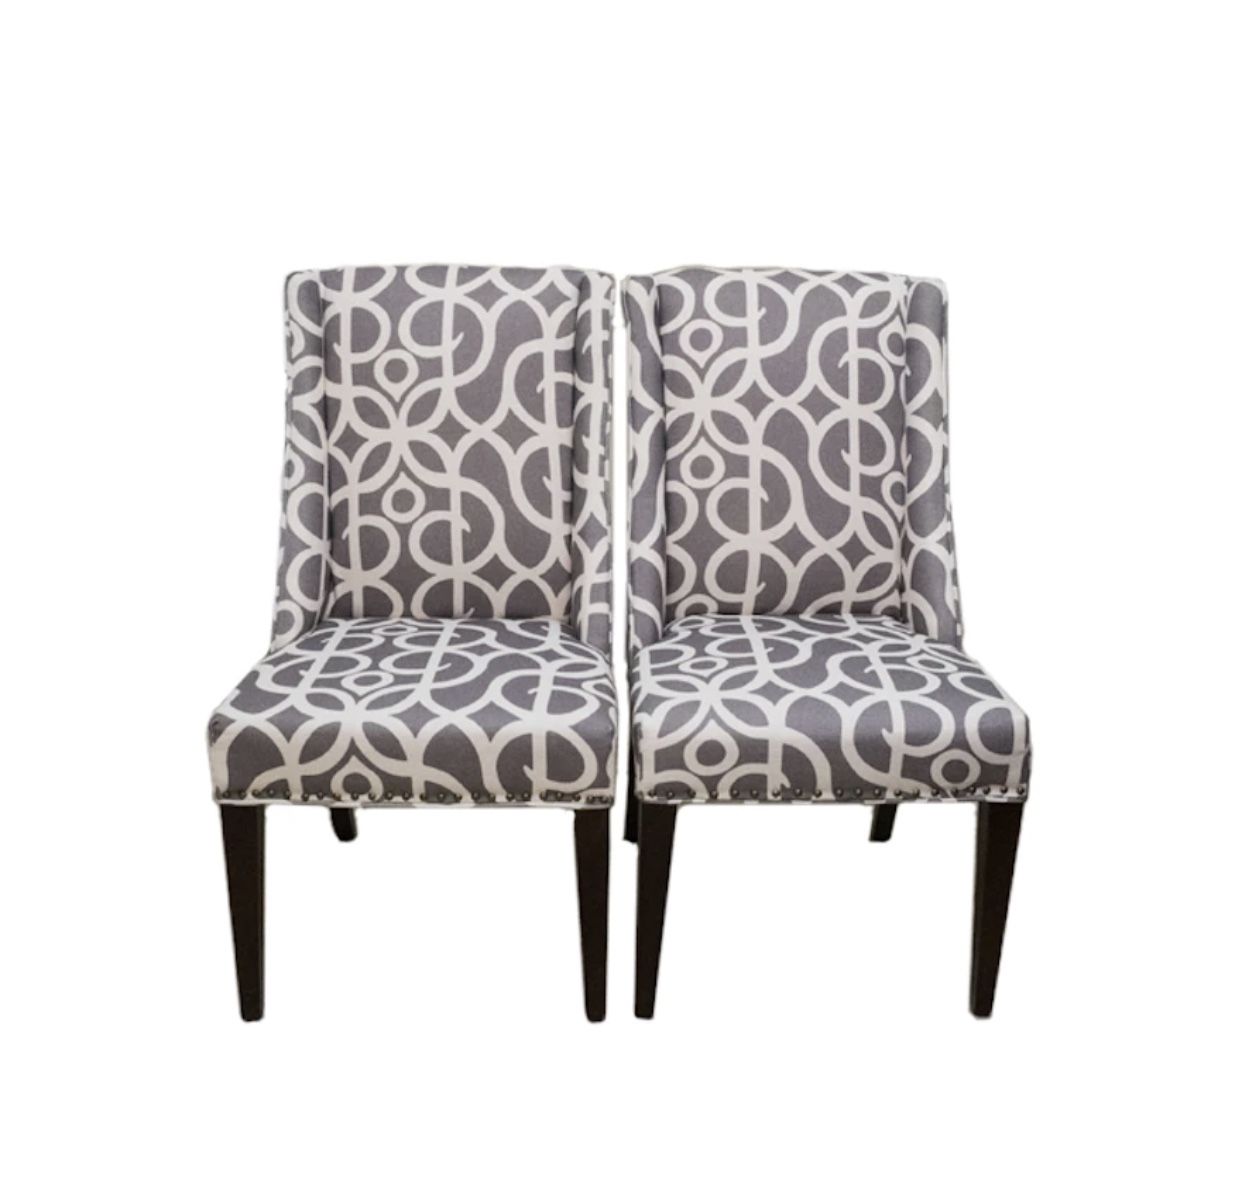 Pair of Pier One "Owen" Wingback Dining Chairs in Pewter Metro